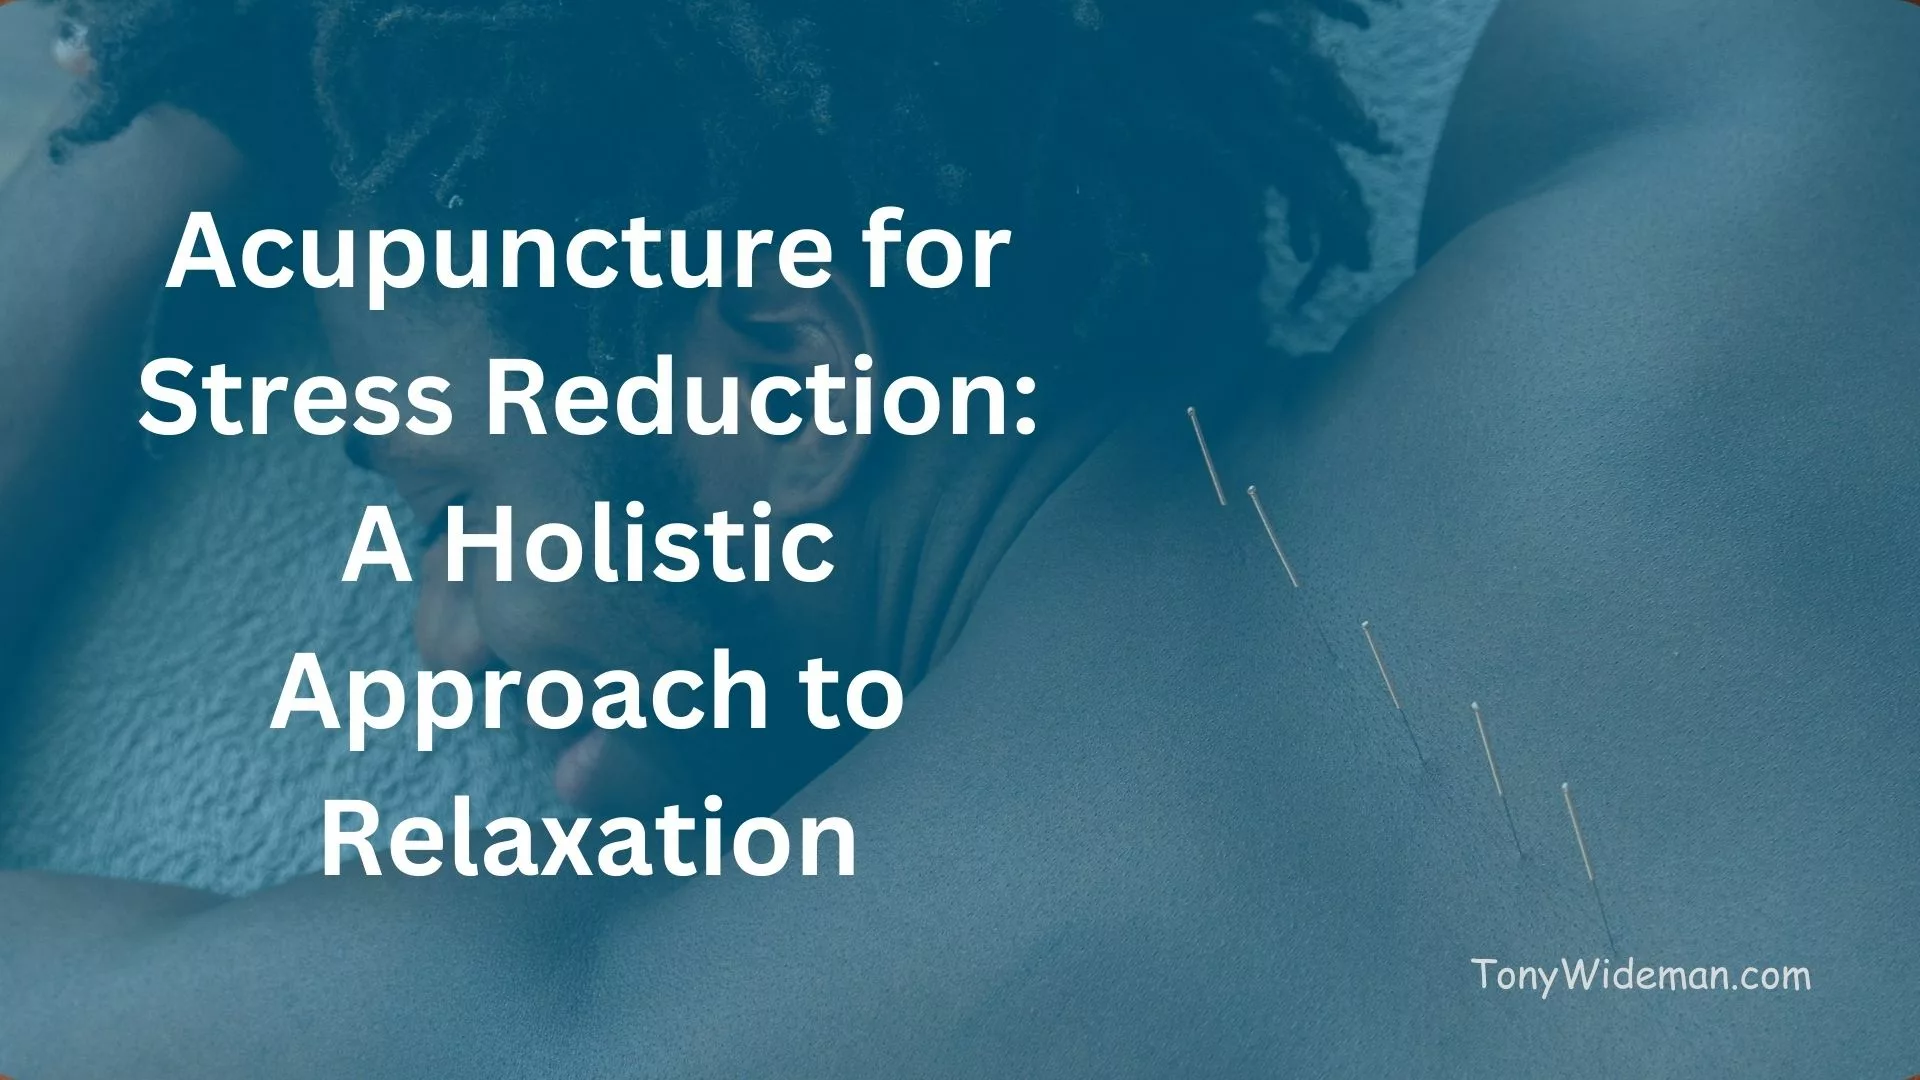 Acupuncture for Stress Reduction: A Holistic Approach to Relaxation